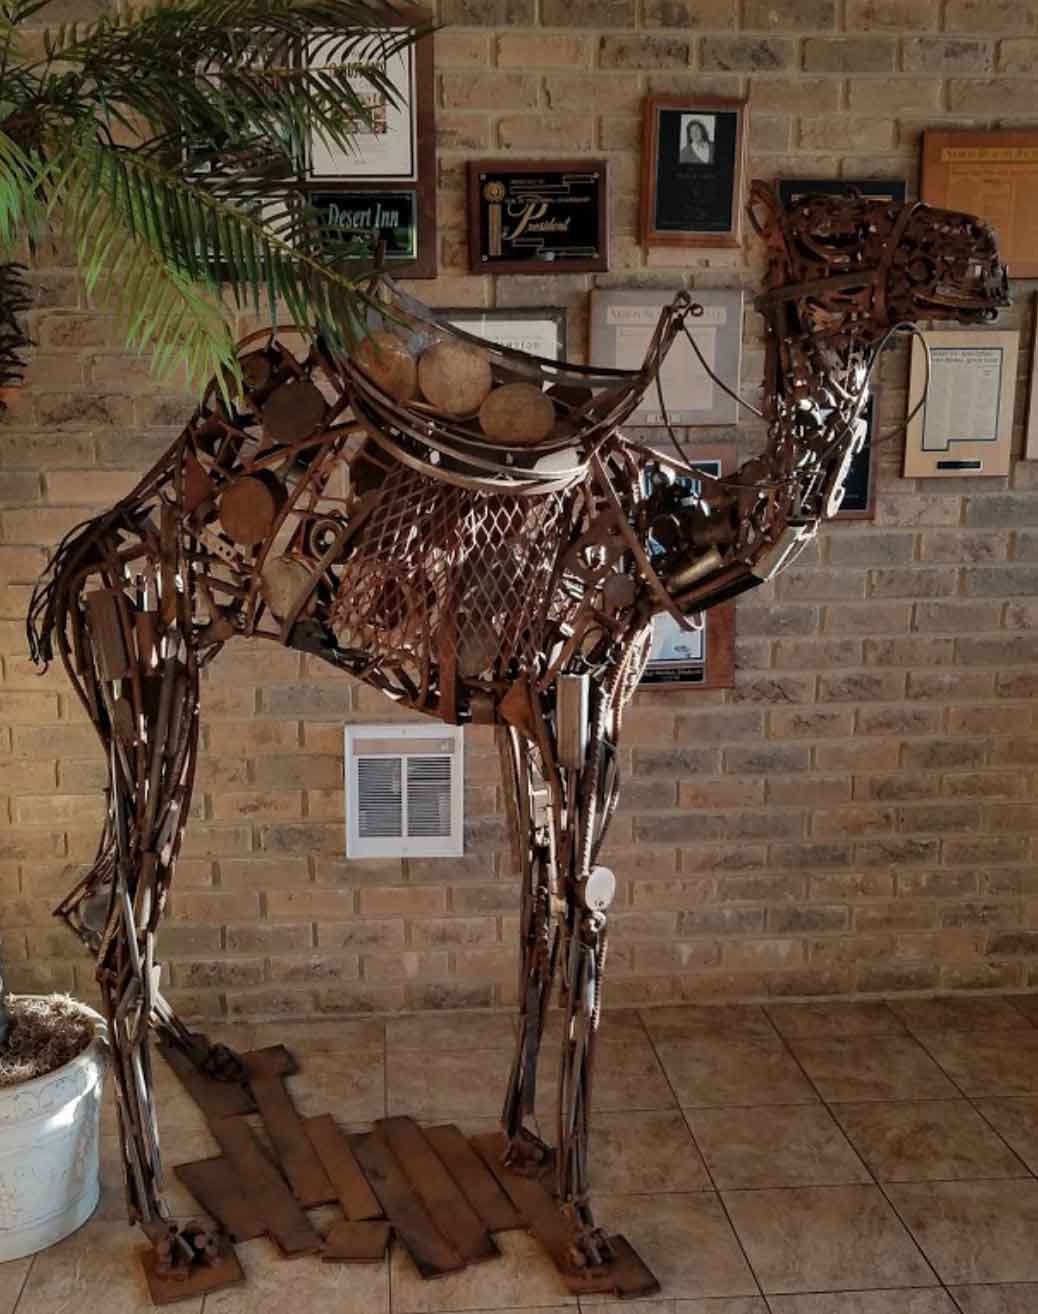 Camel Decoration at The Desert Inn in Canton, OH.